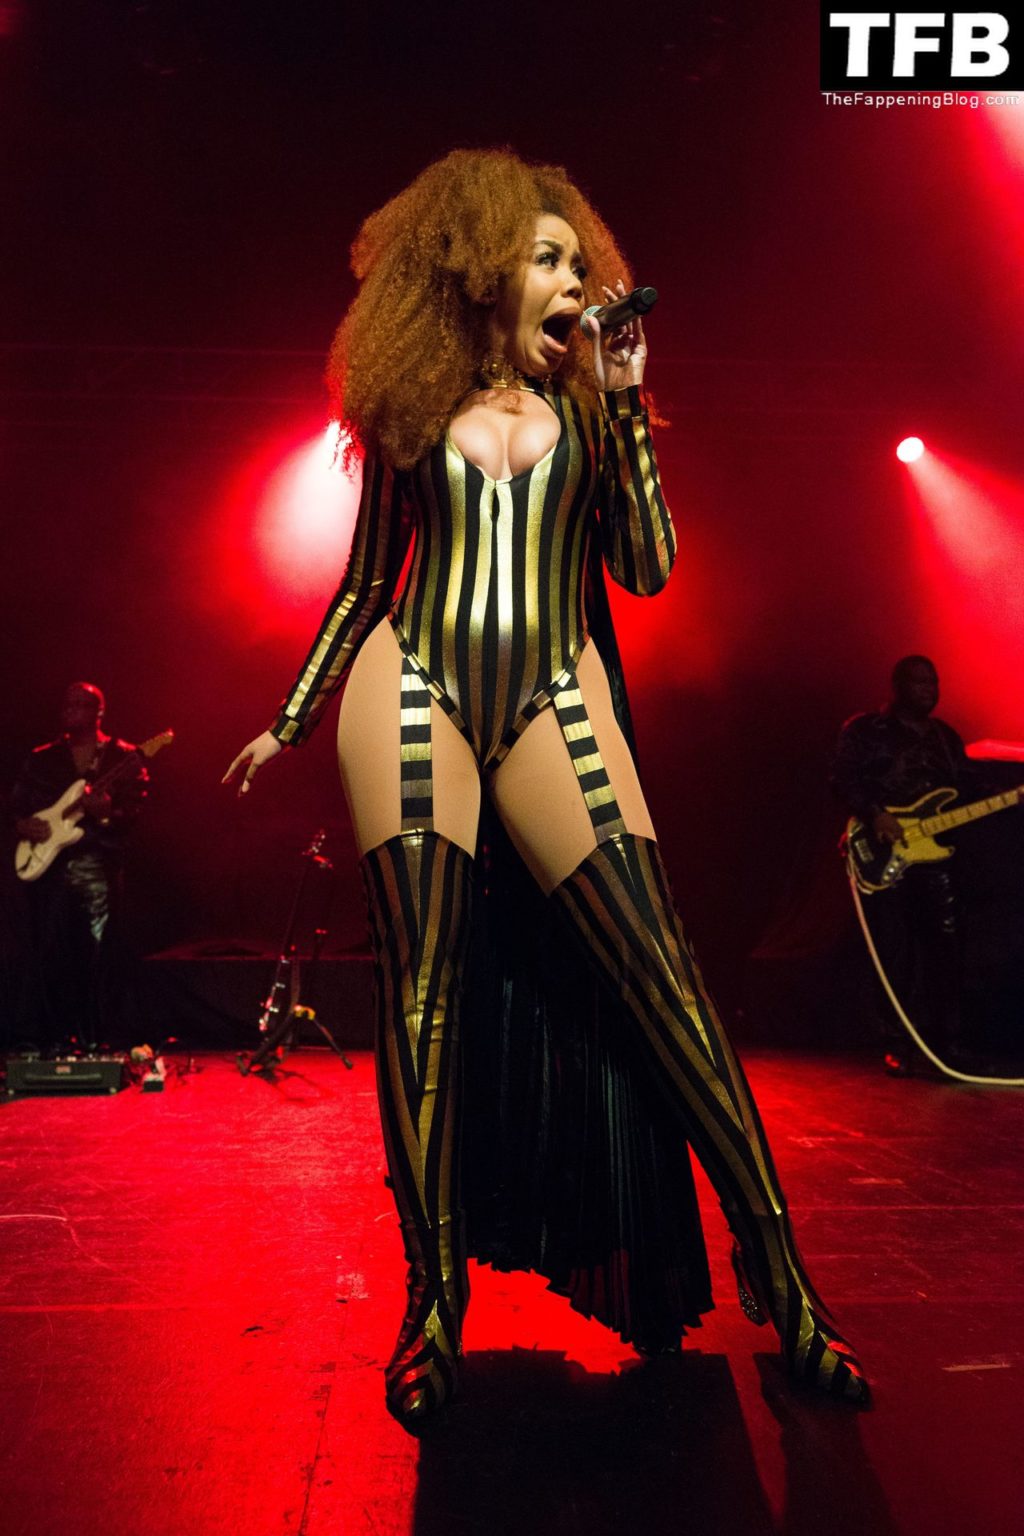 Kirby Flashes Her Areolas as She Performs at O2 Academy in Birmingham (10 Photos)